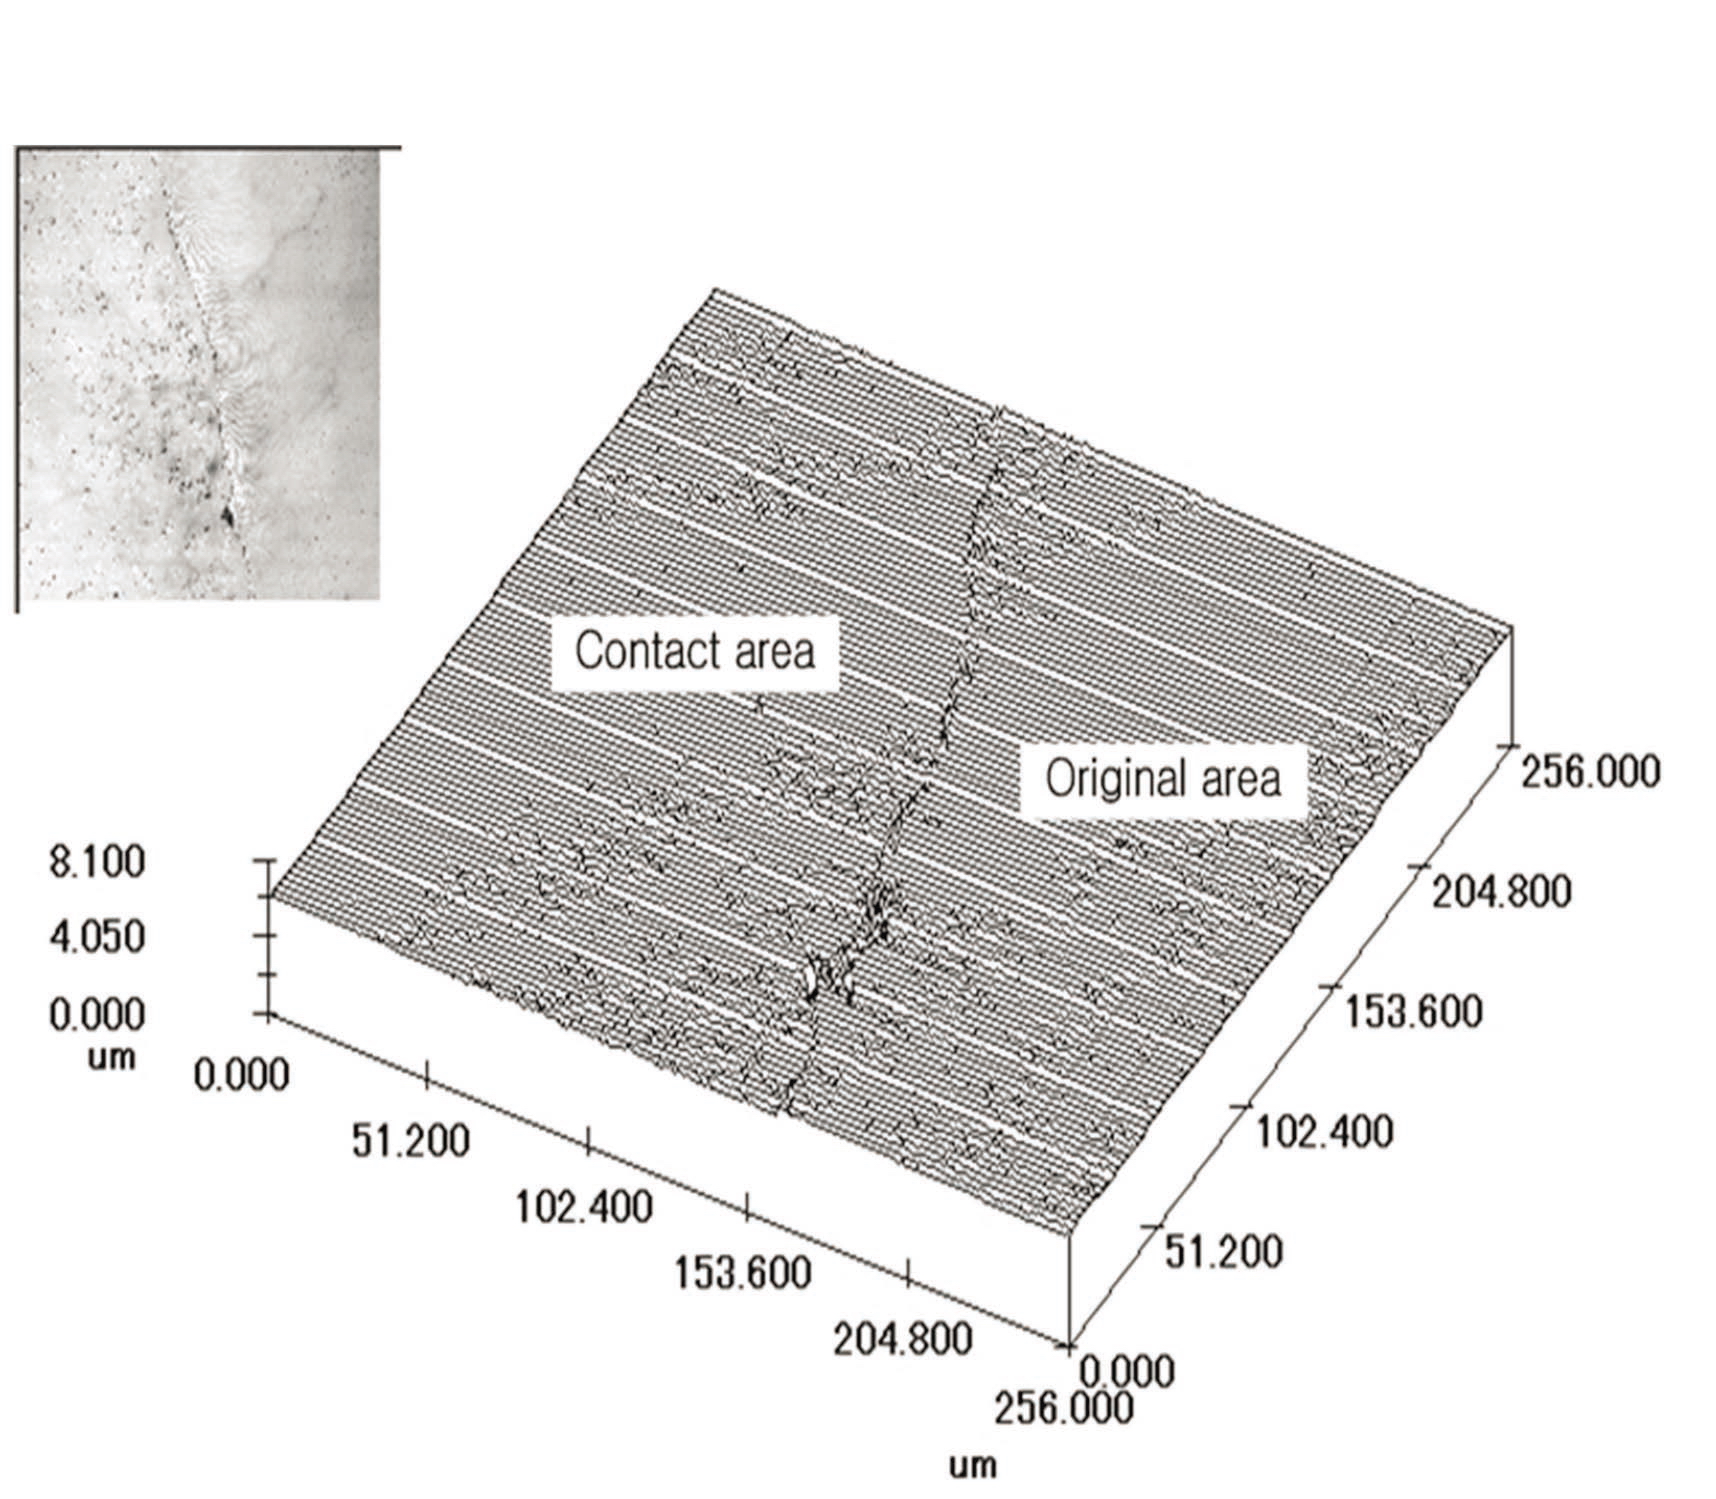 2D and 3D Image of Surface of Single Crystal Quartz from Cylindrical Quartz Dissolution Experiment